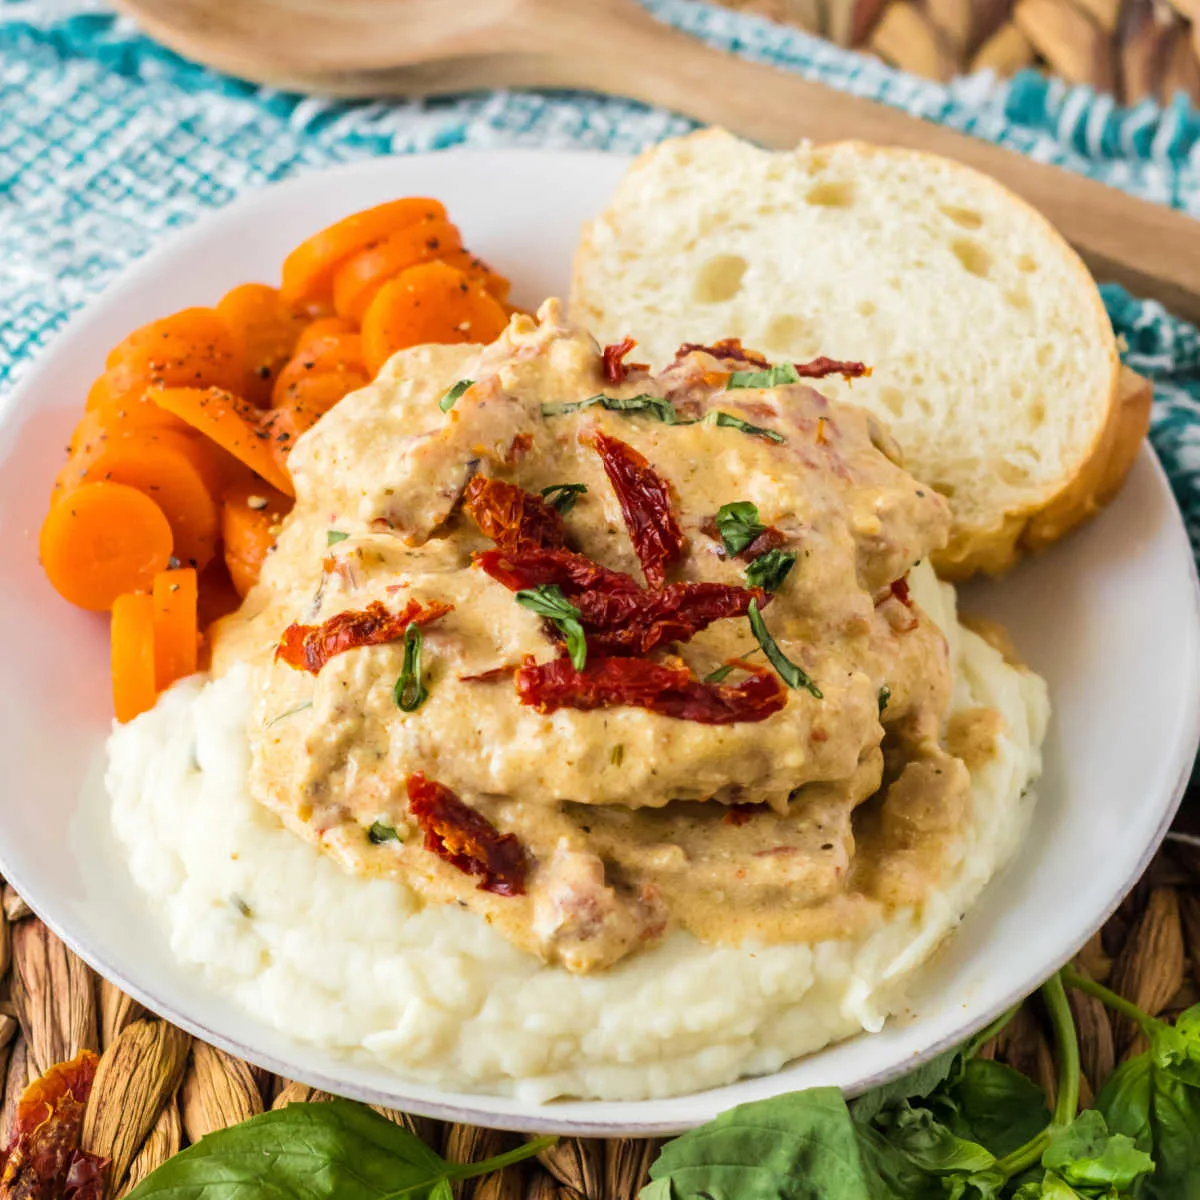 Dinner plate featuring sun dried tomato topped marry me pork chops on a bed of mashed potatoes served with carrots and bread.